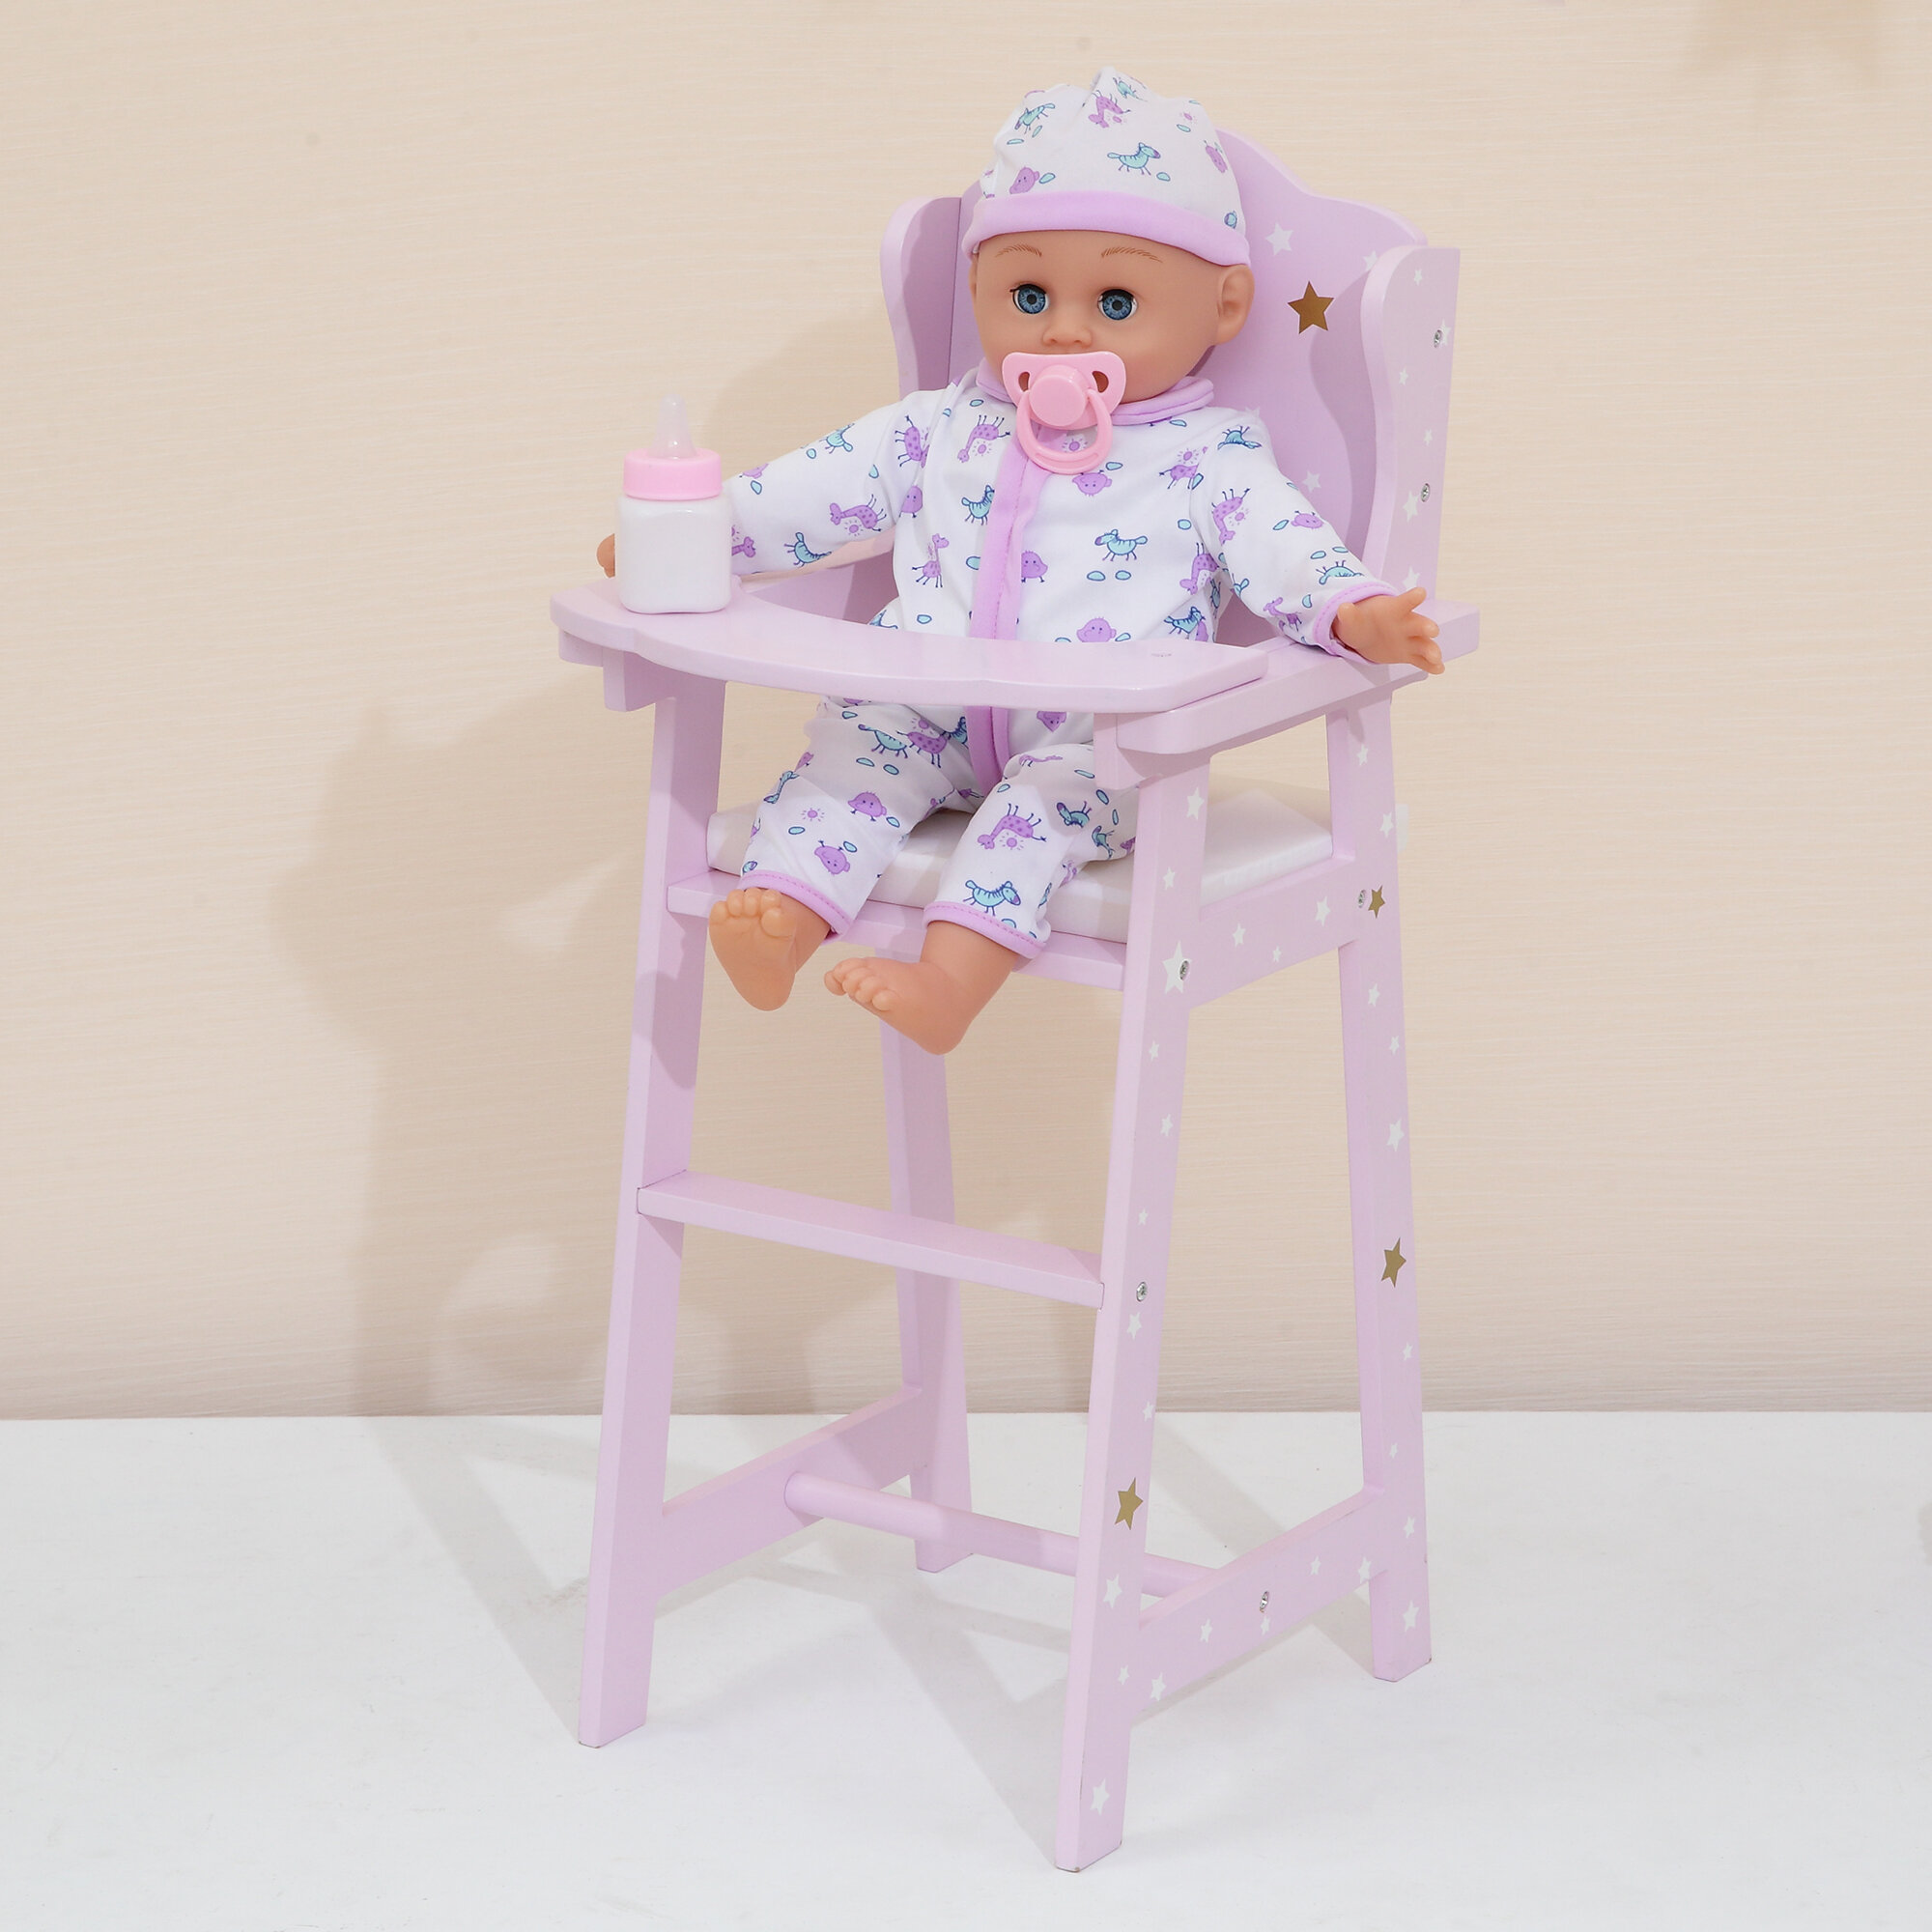 high chair for a doll